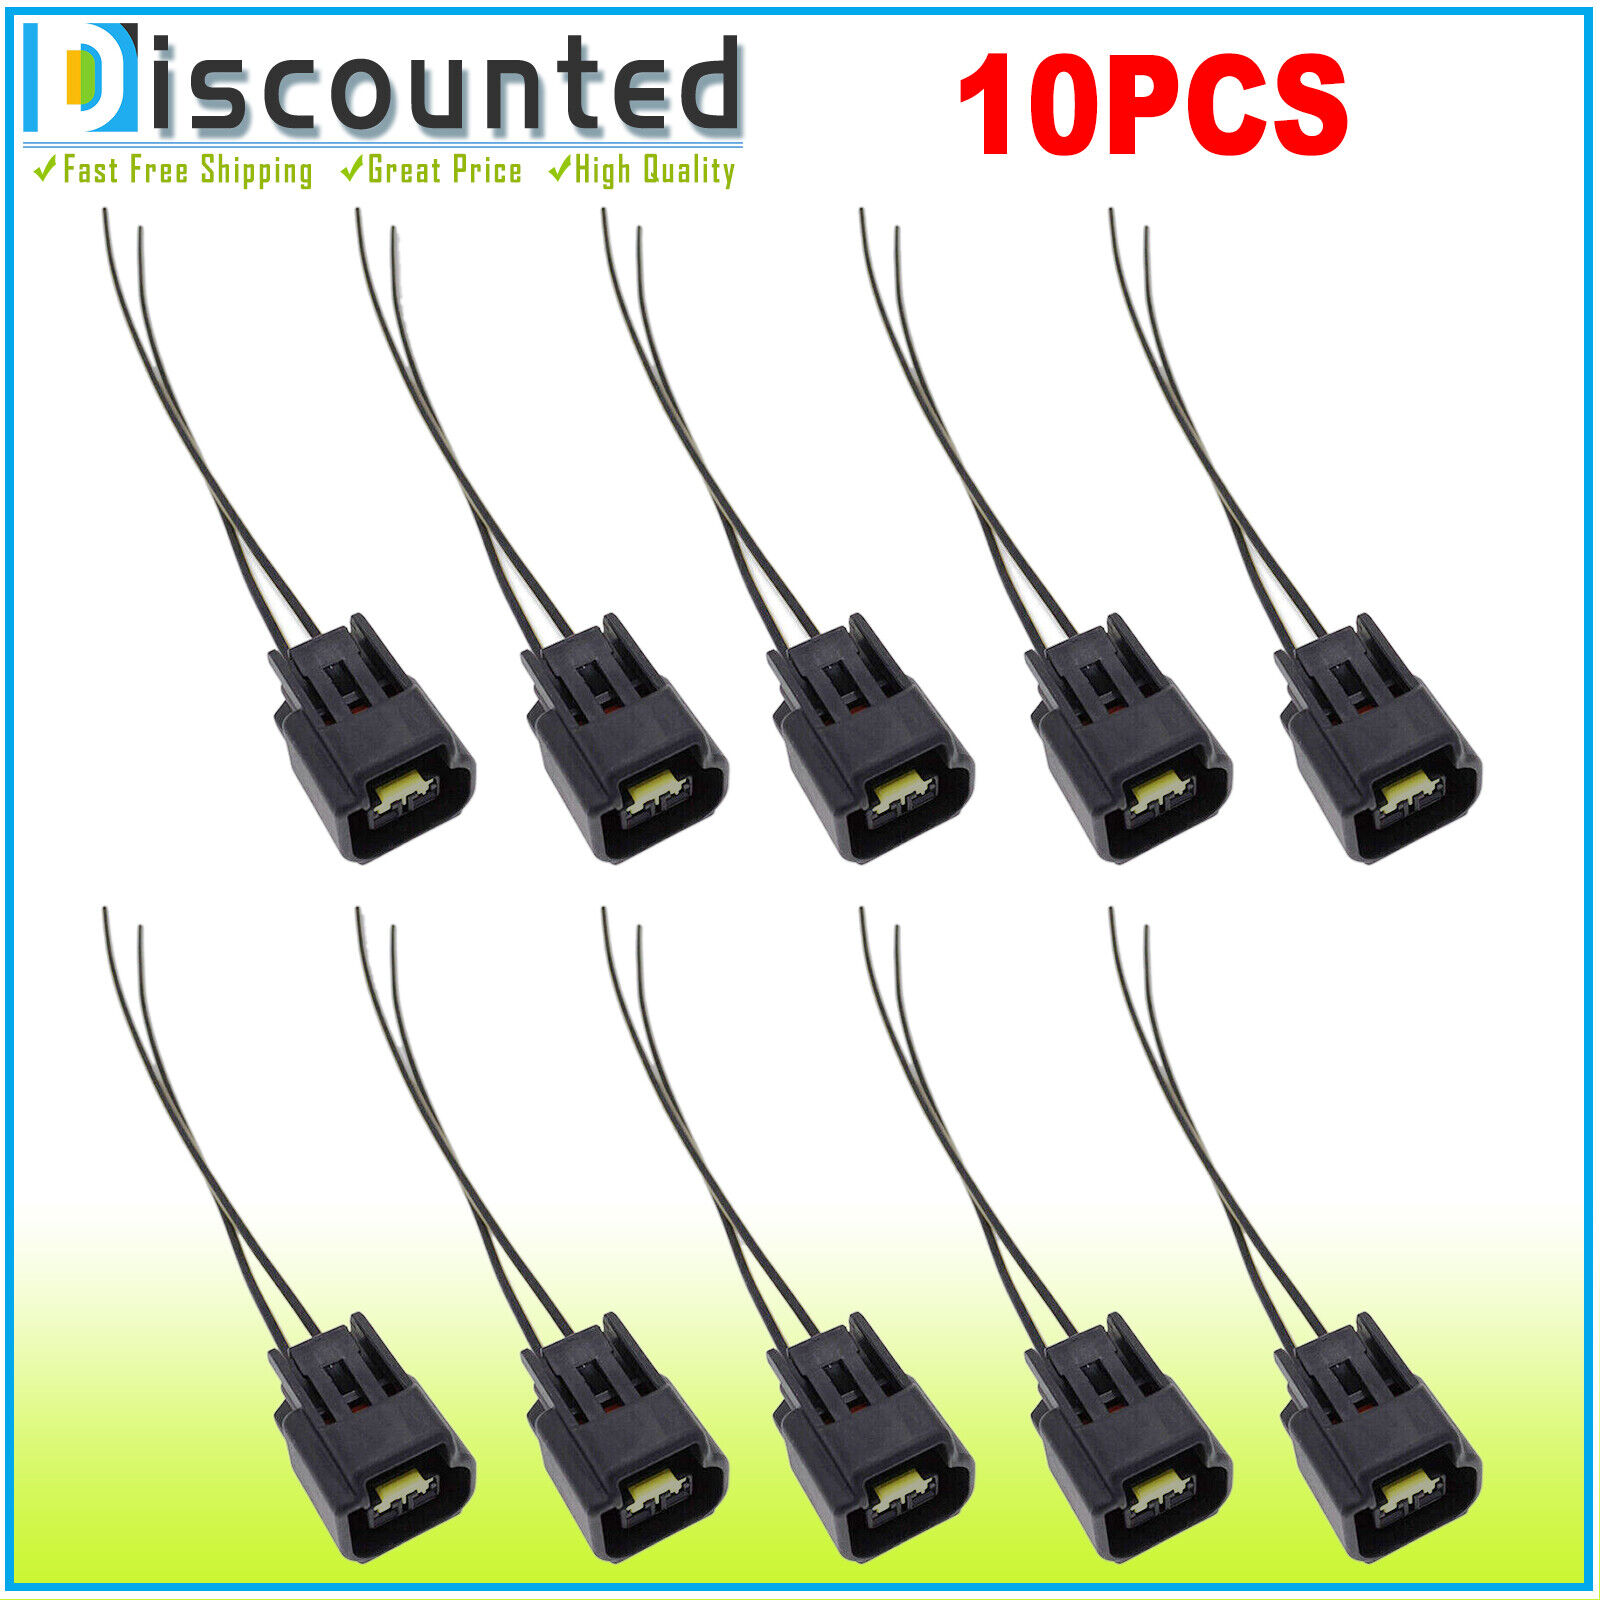 10 x Ignition Coil Connector Harness for Mercury Milan Mazda 3 6 4.6L 5.4L 6.8L